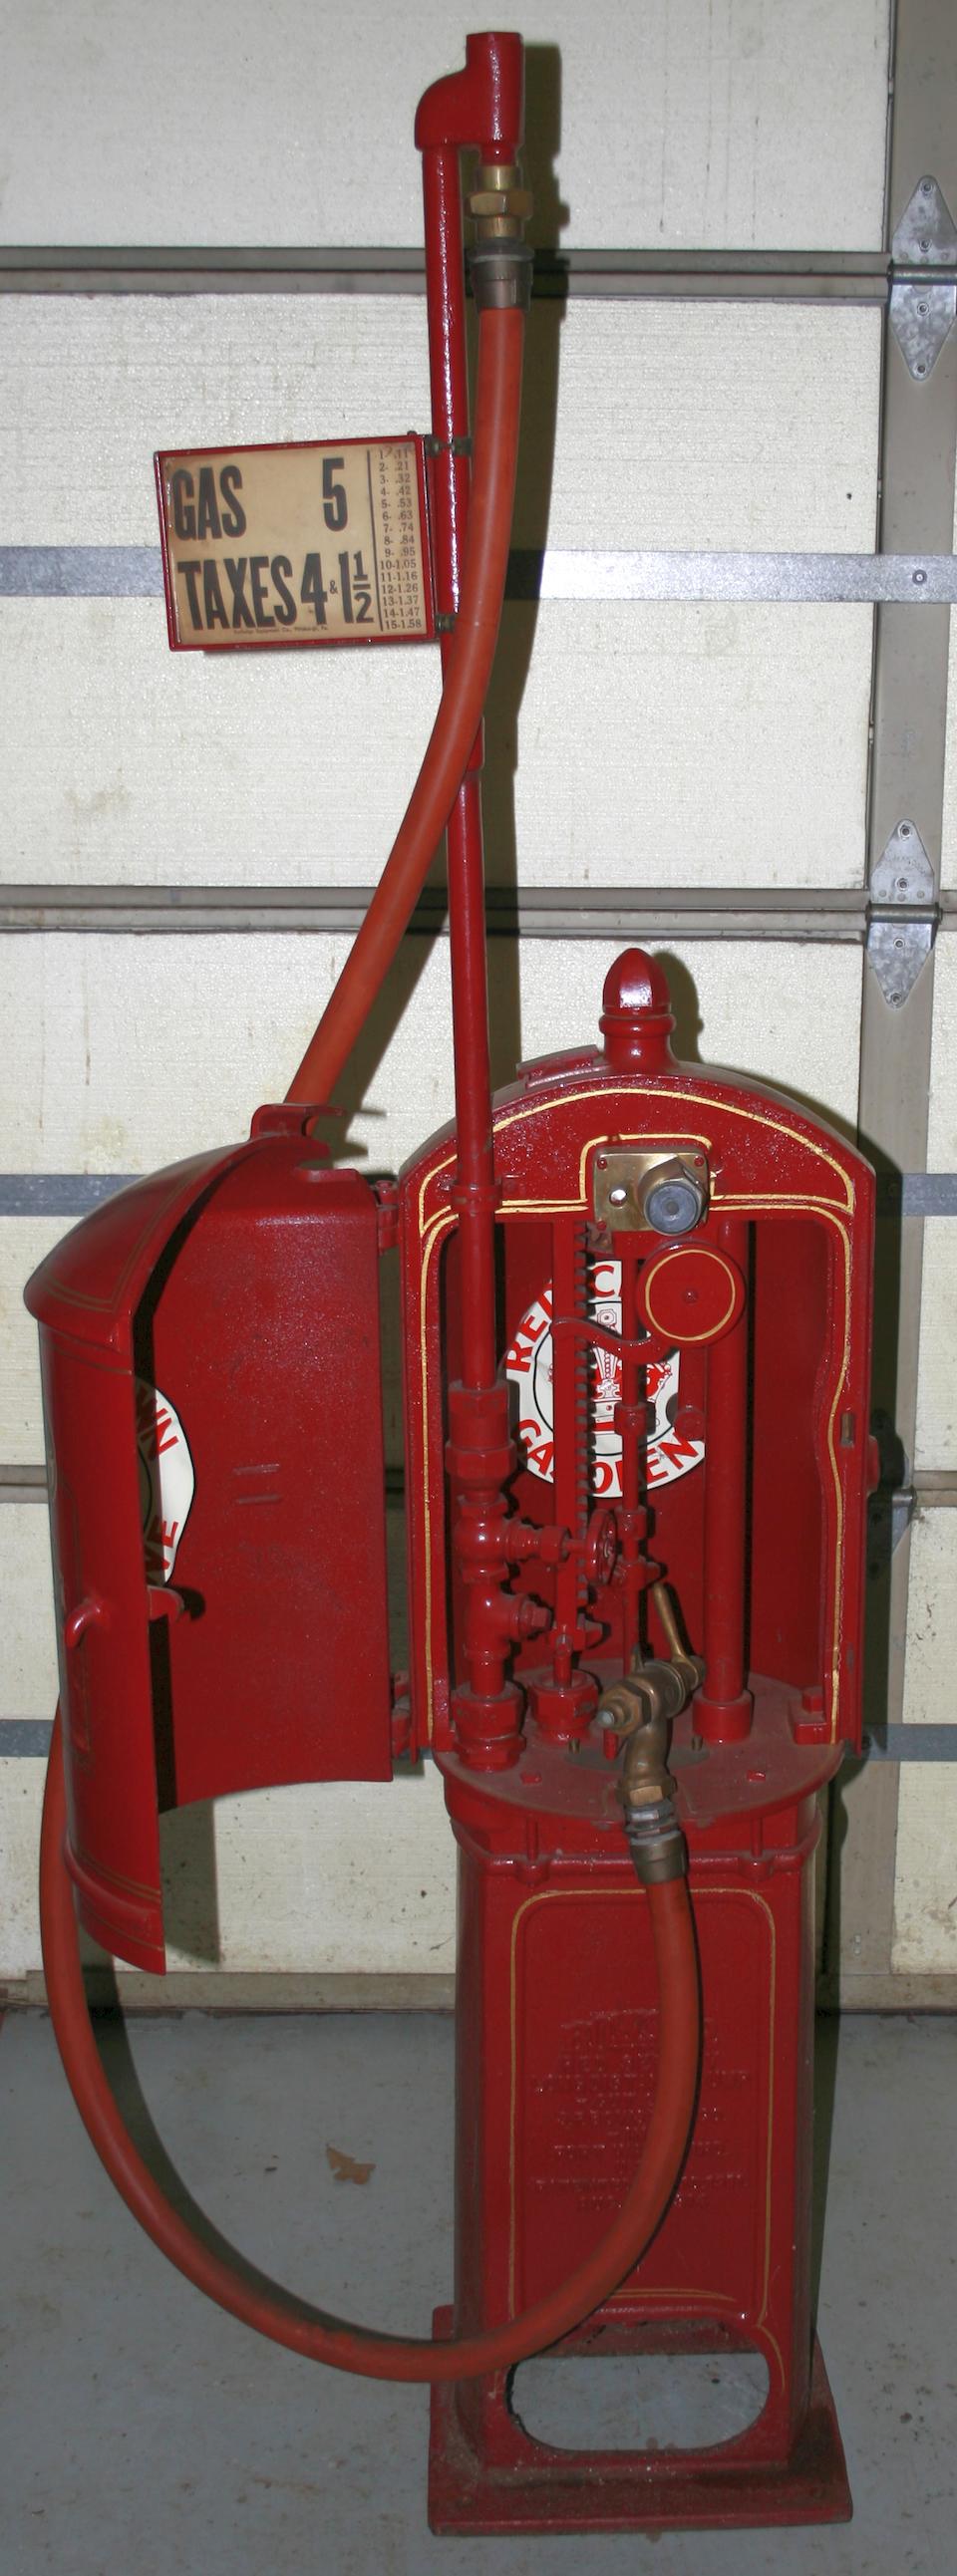 A BOWSER 'RED SENTRY' MODEL 241 GASOLINE PUMP, PATENTED 1911 AND 1914,